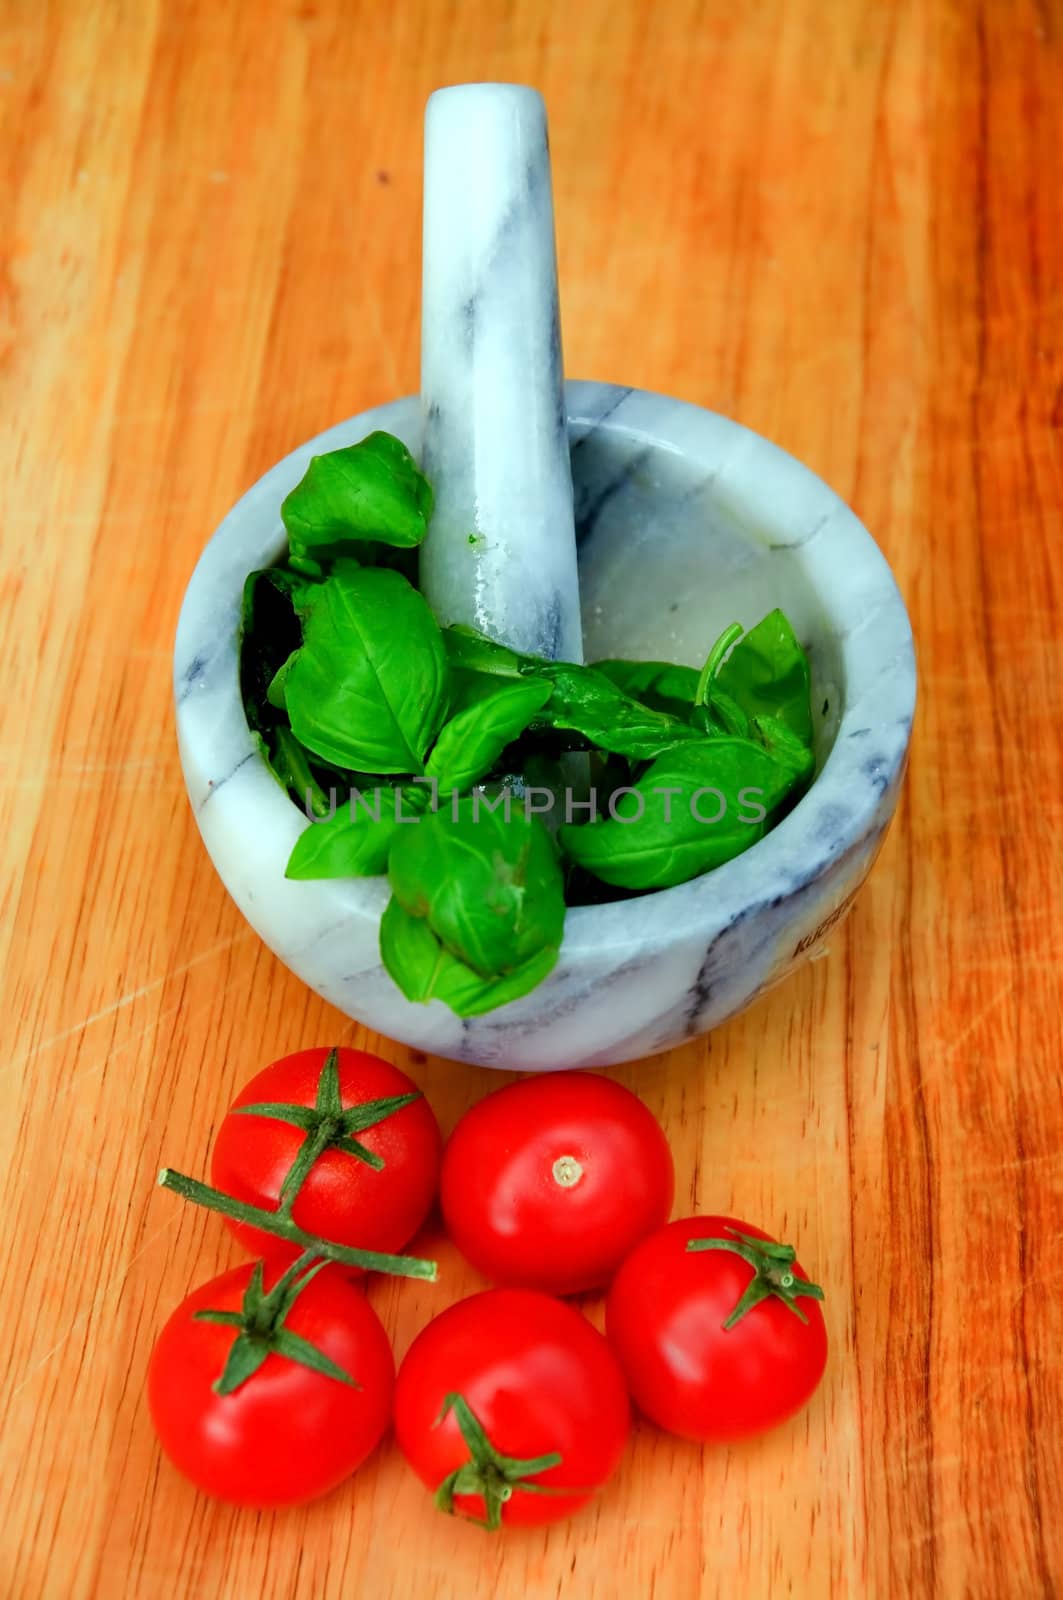 Tomatoes, basil and a mortar on a wooden cutting board